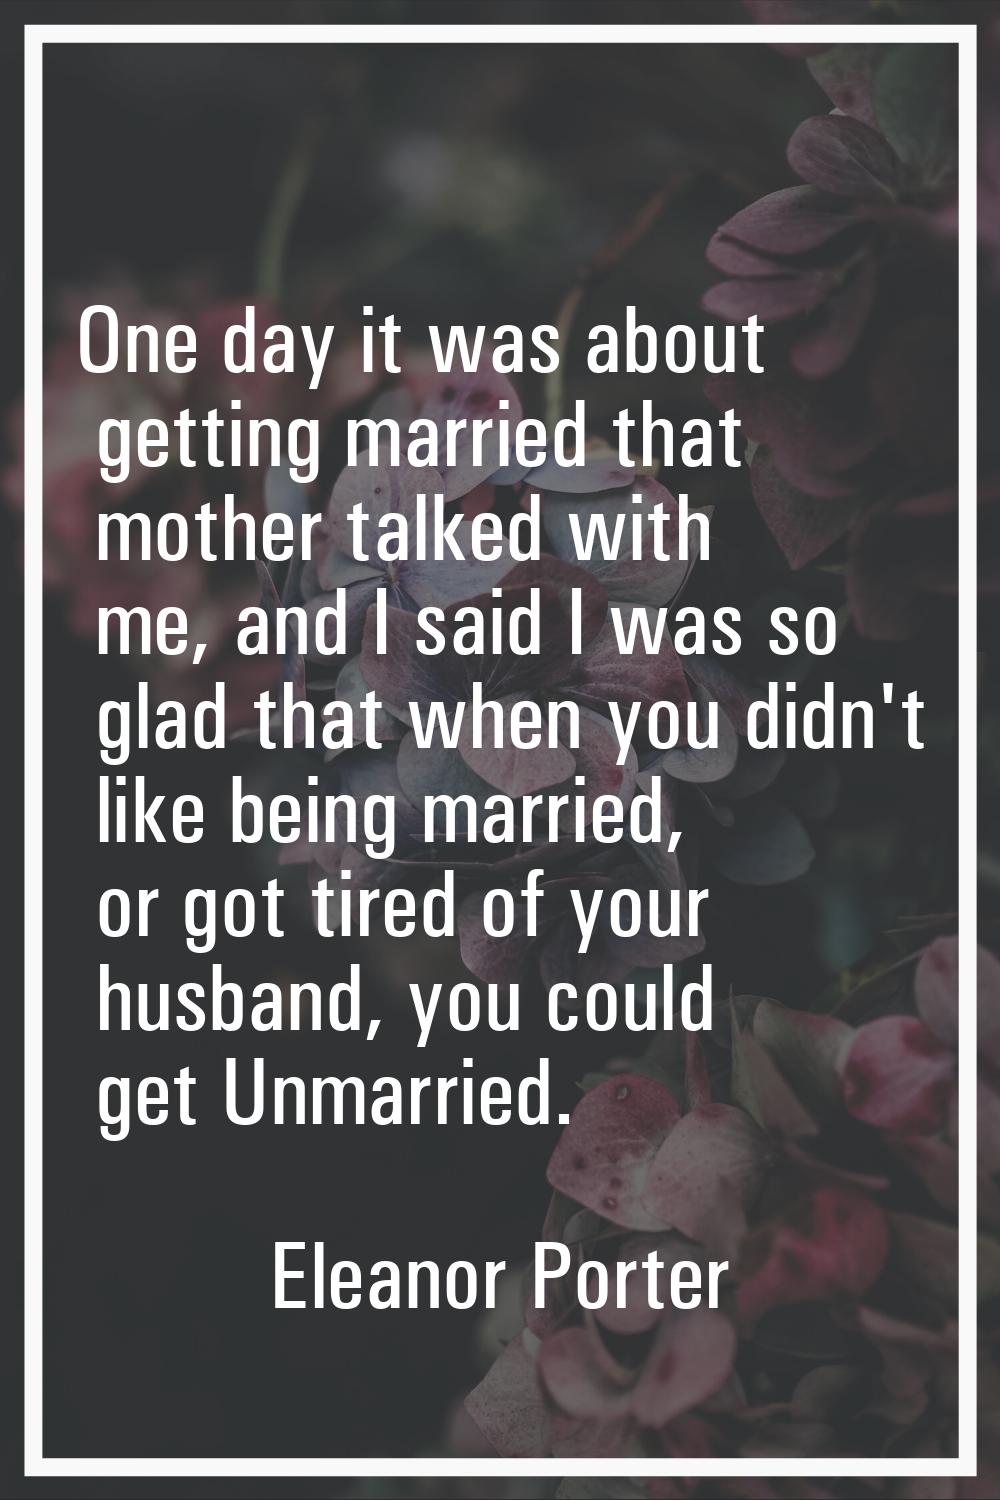 One day it was about getting married that mother talked with me, and I said I was so glad that when